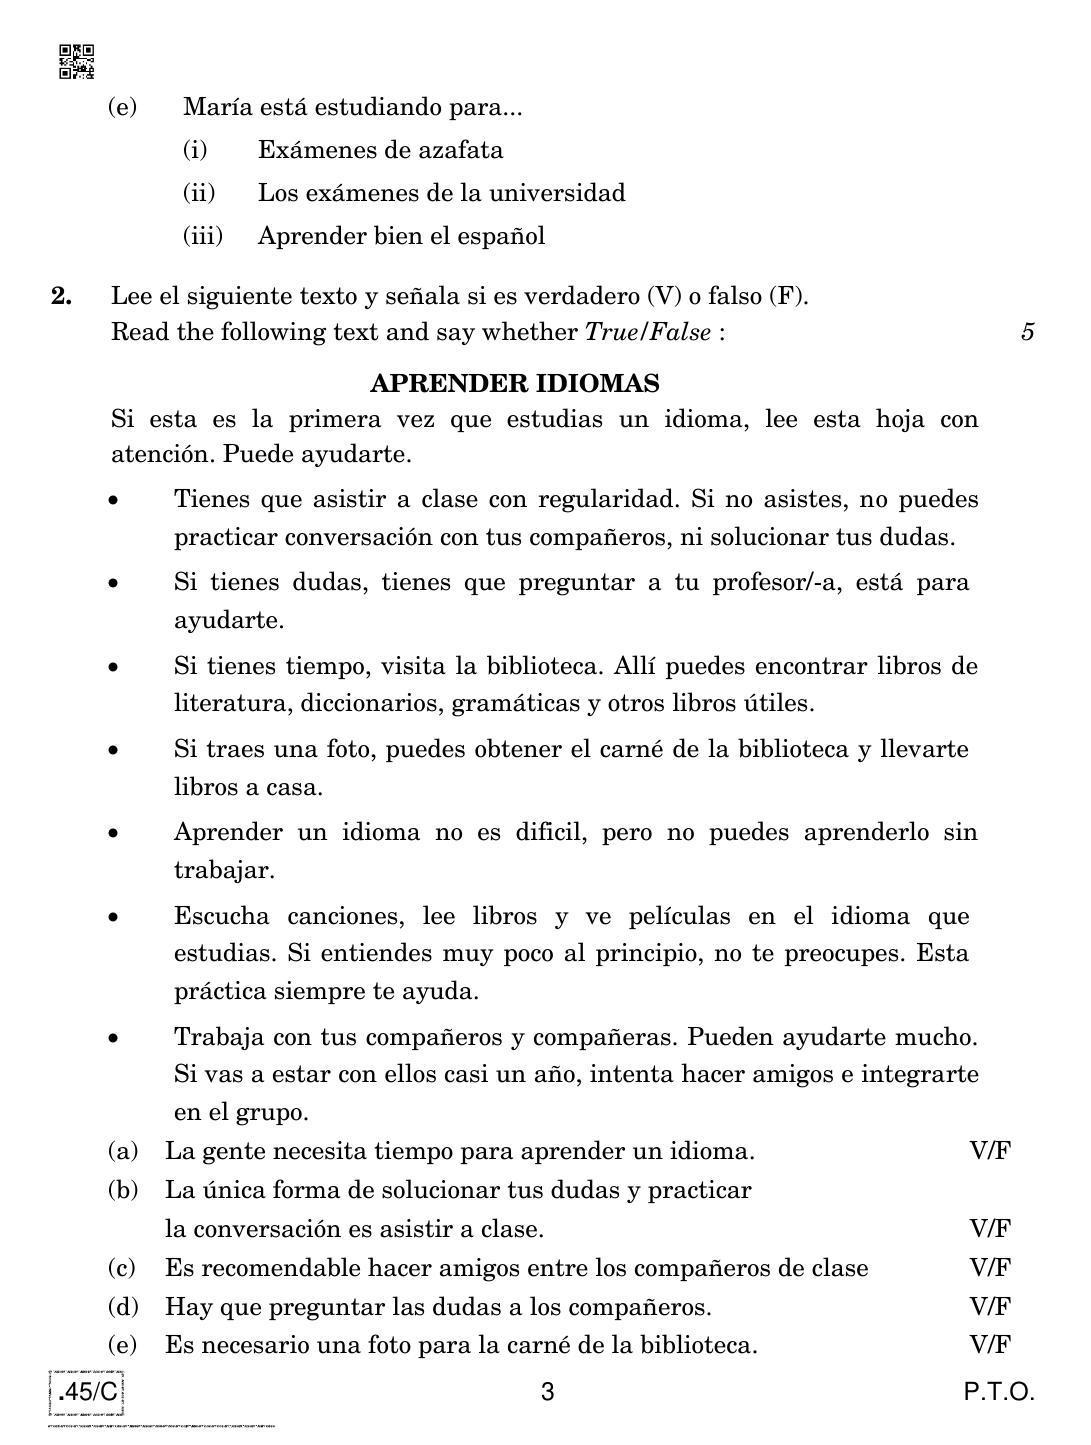 CBSE Class 10 Spanish 2020 Compartment Question Paper - Page 3